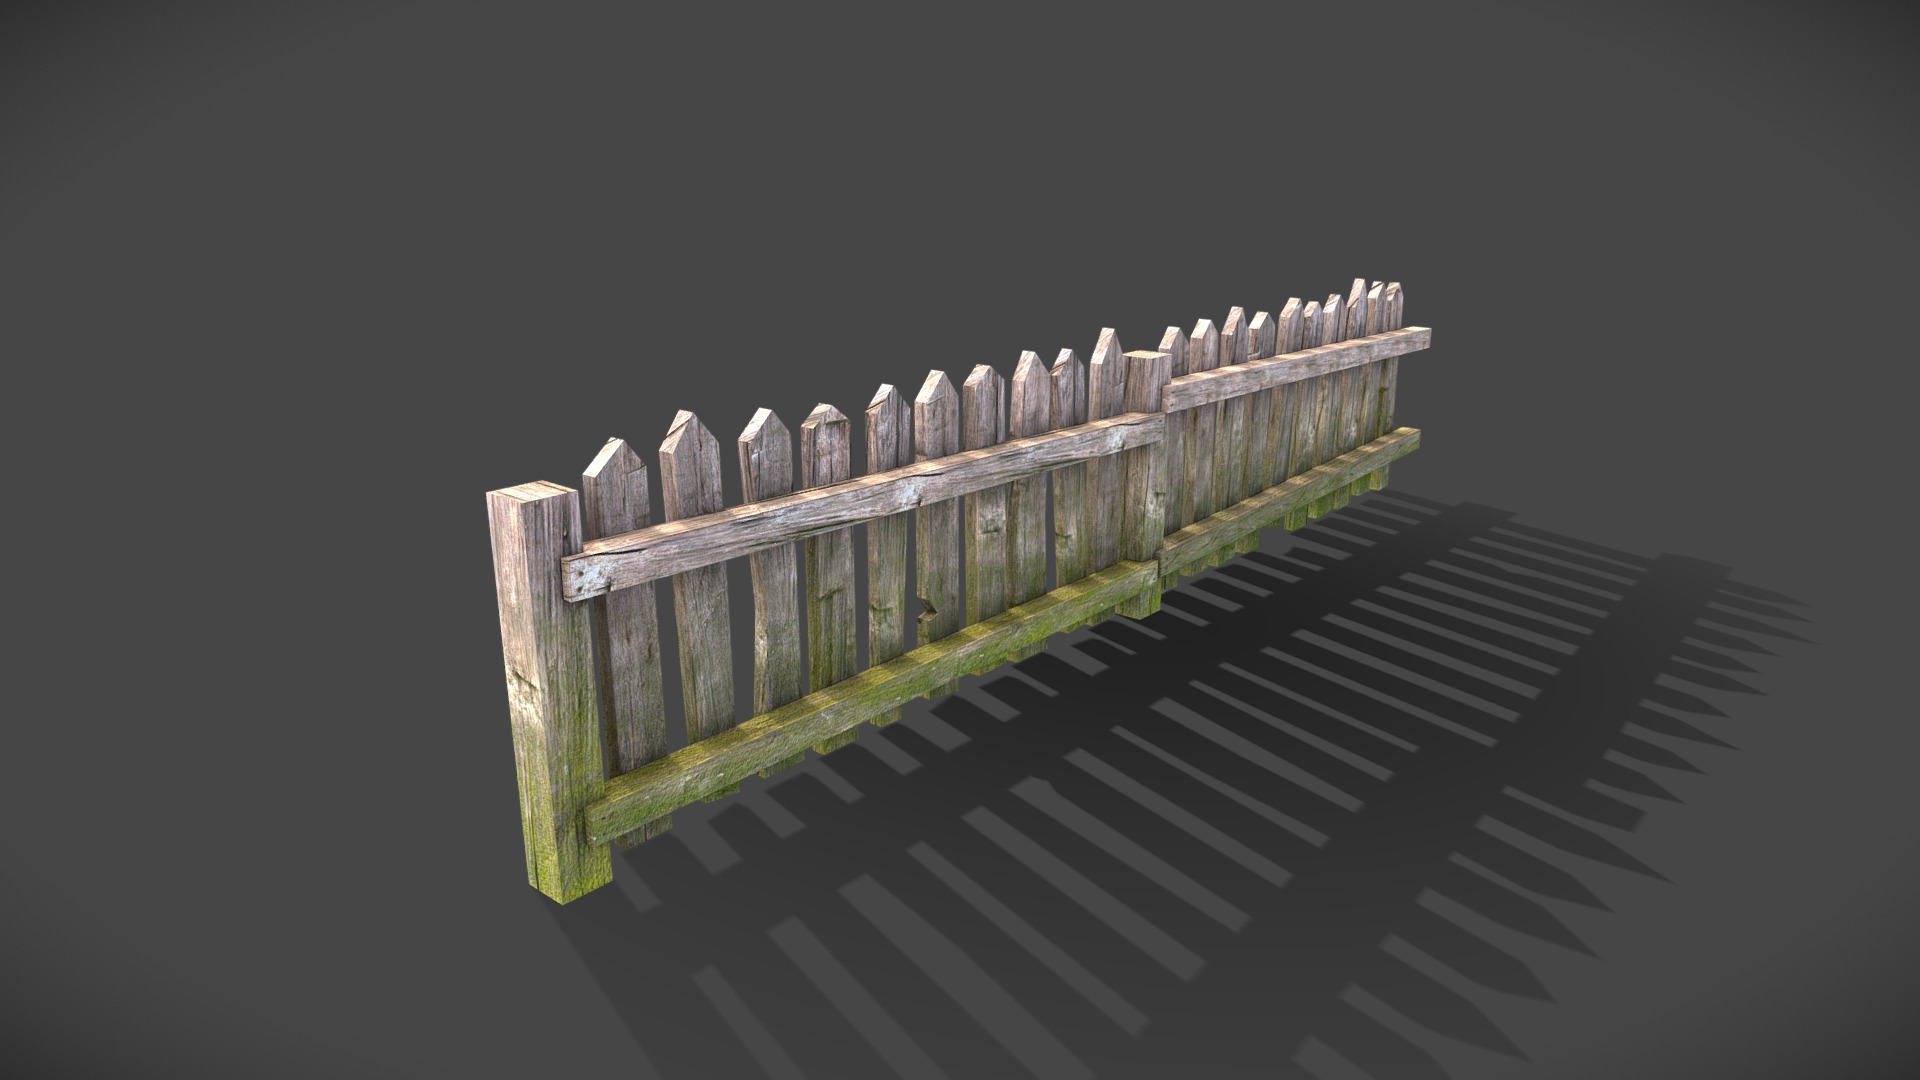 3D model fence - This is a 3D model of the fence. The 3D model is about a wooden bridge with railings.